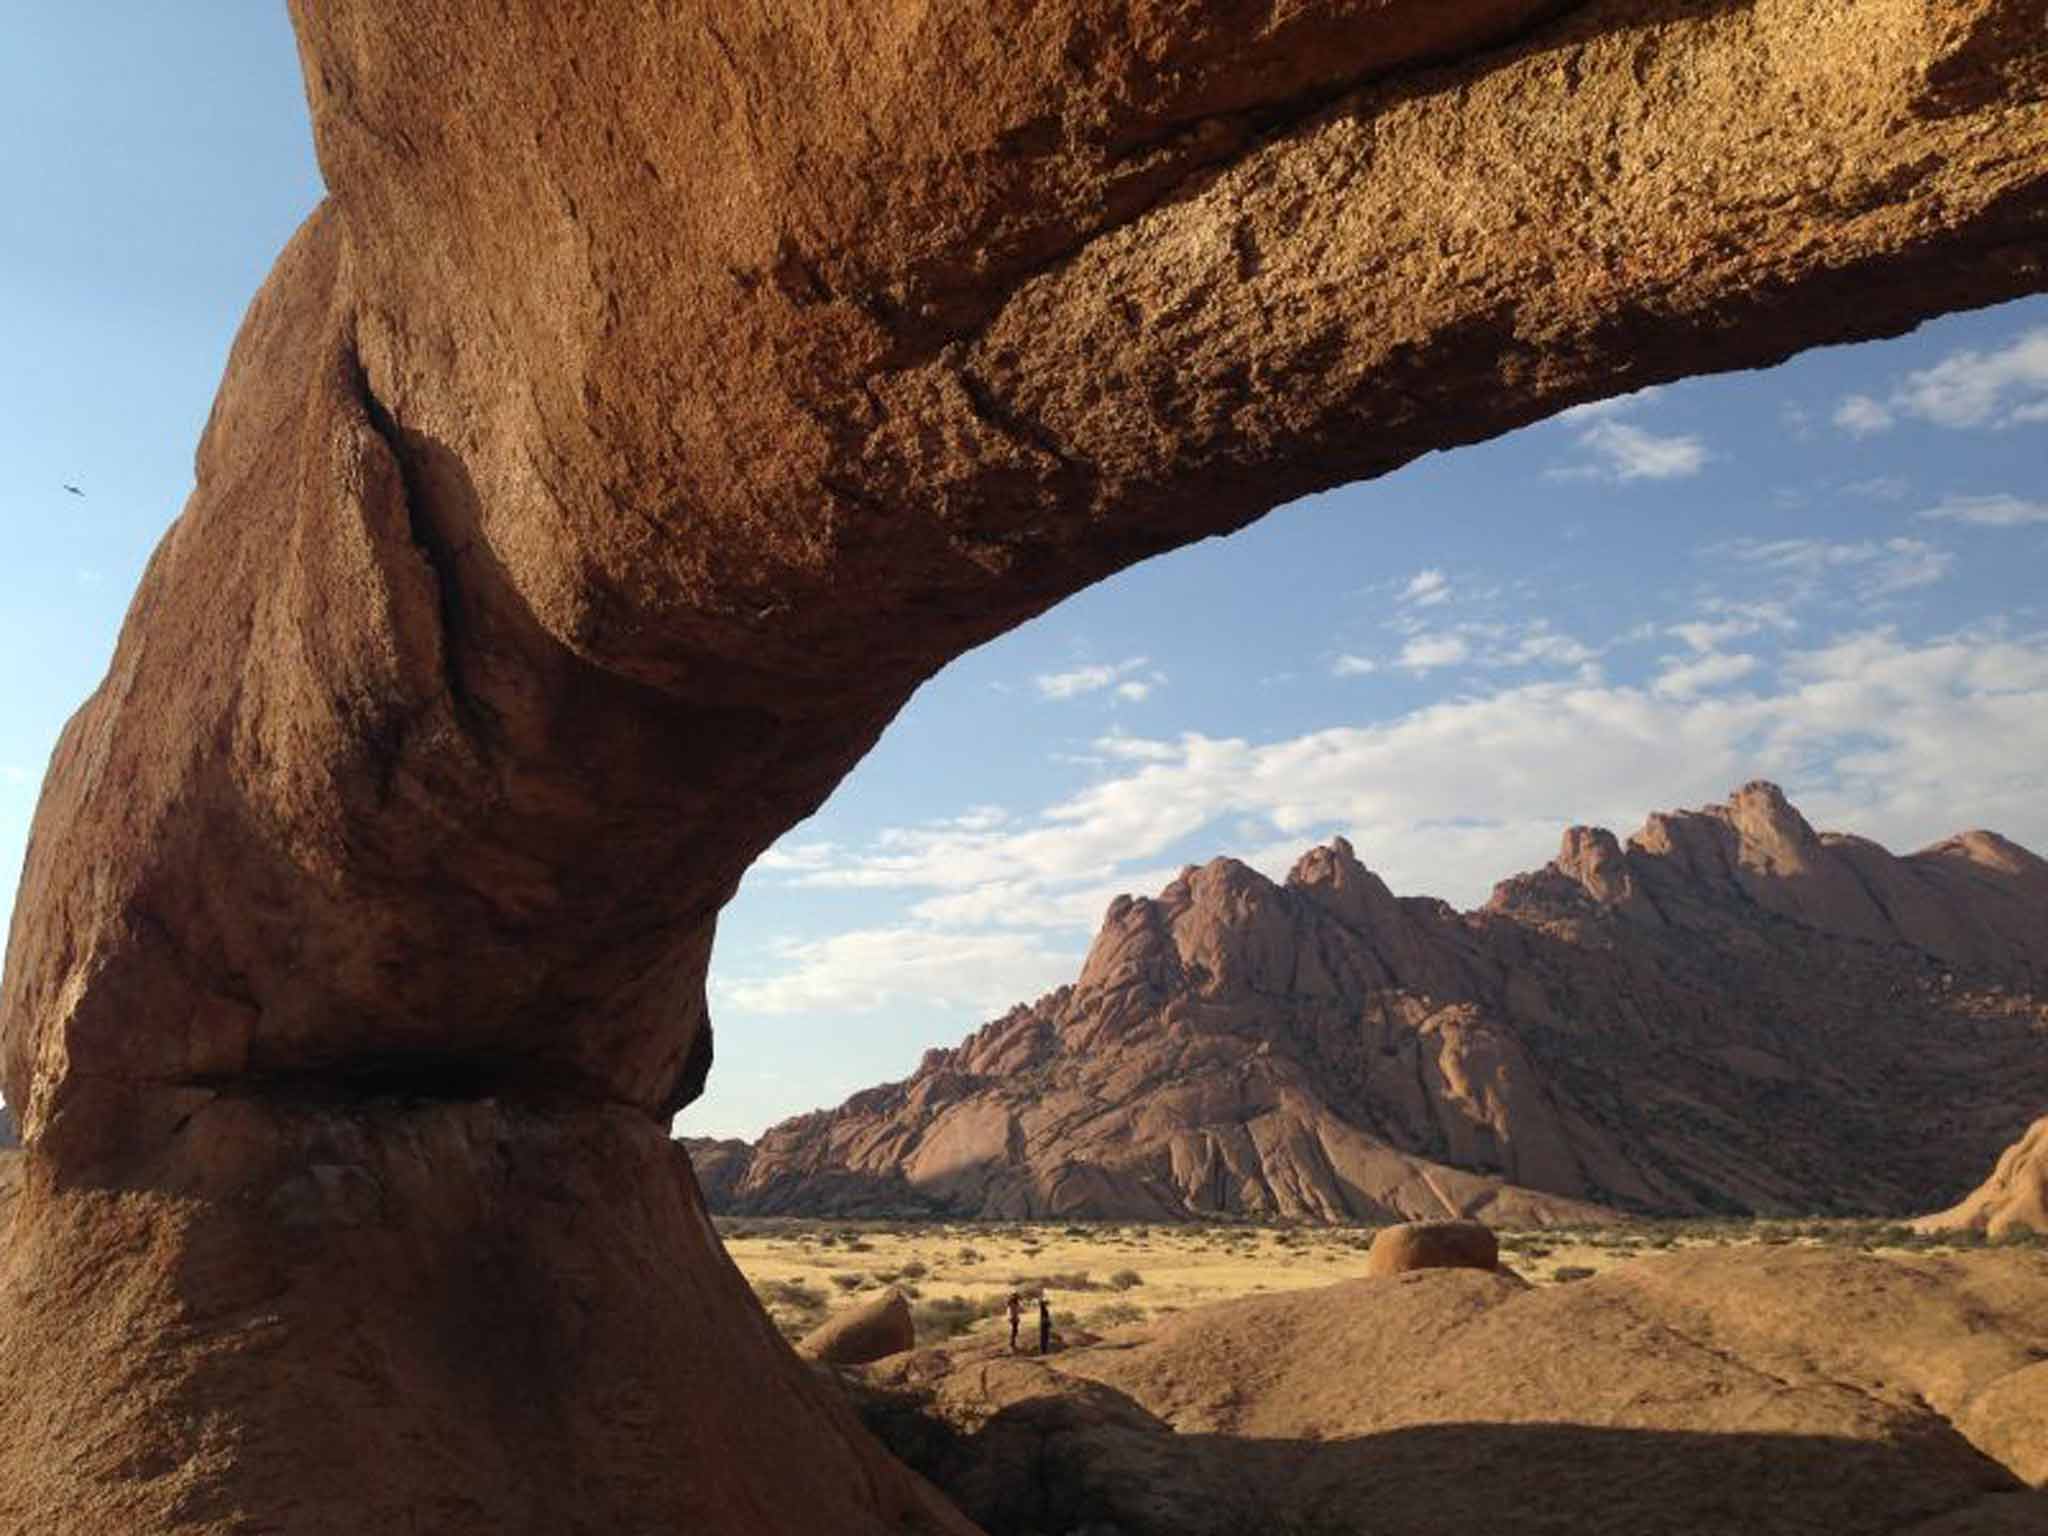 Rock star: the surreal landscape around Spitzkoppe